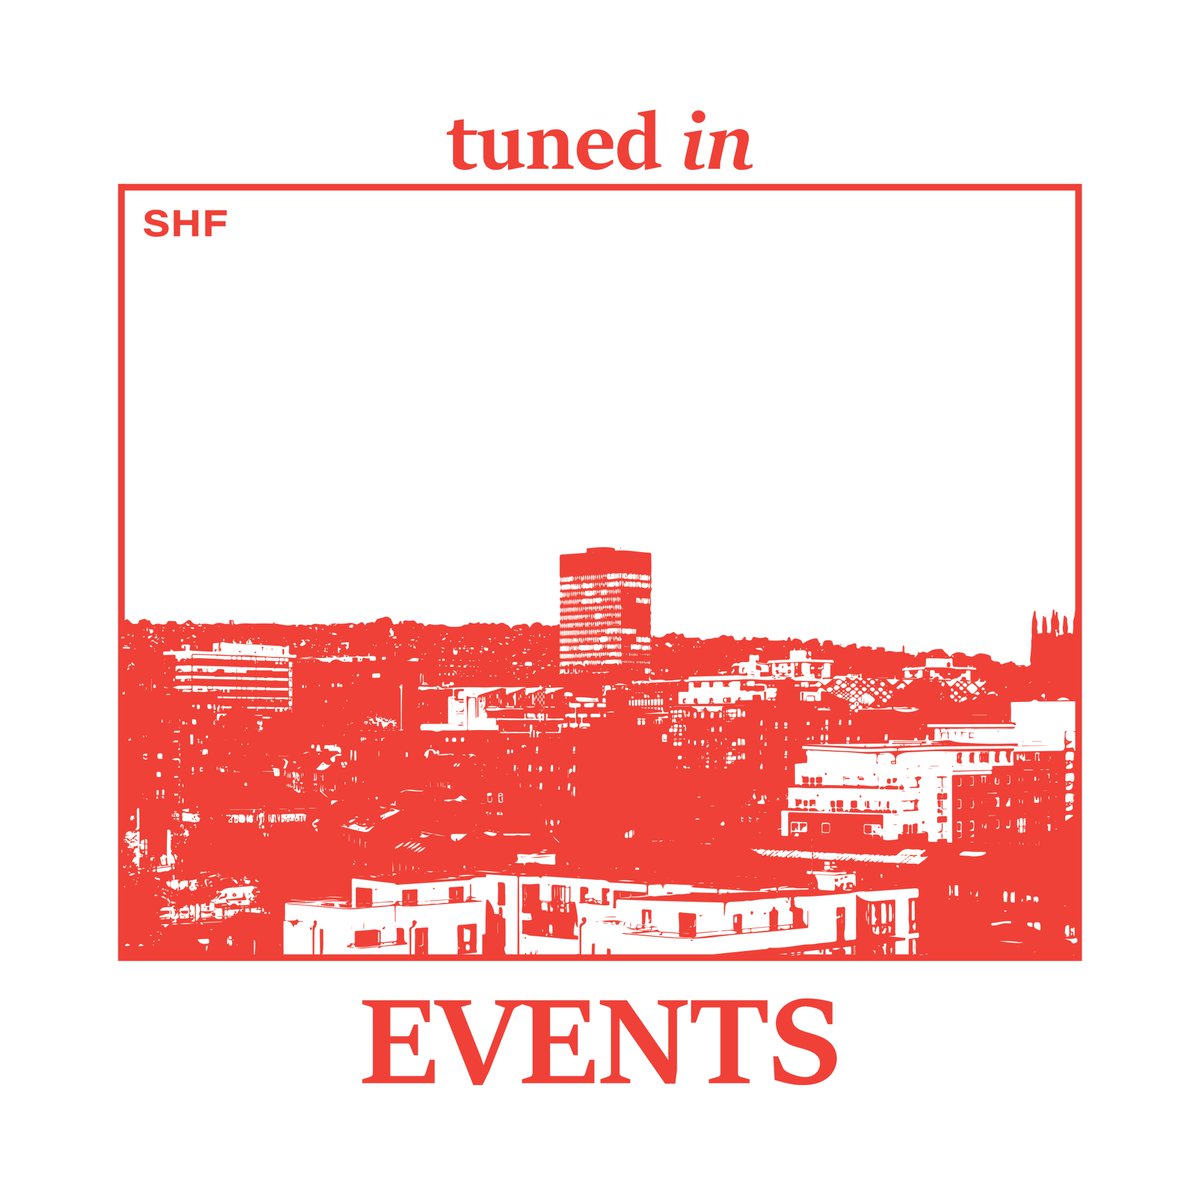 welcome ! this is tuned in events. we are a new music events group based in sheffield, hoping to bring you something new, and slightly different. we will be announcing our first gig soon, so make sure you follow us to keep up-to-date with our events. cheers x